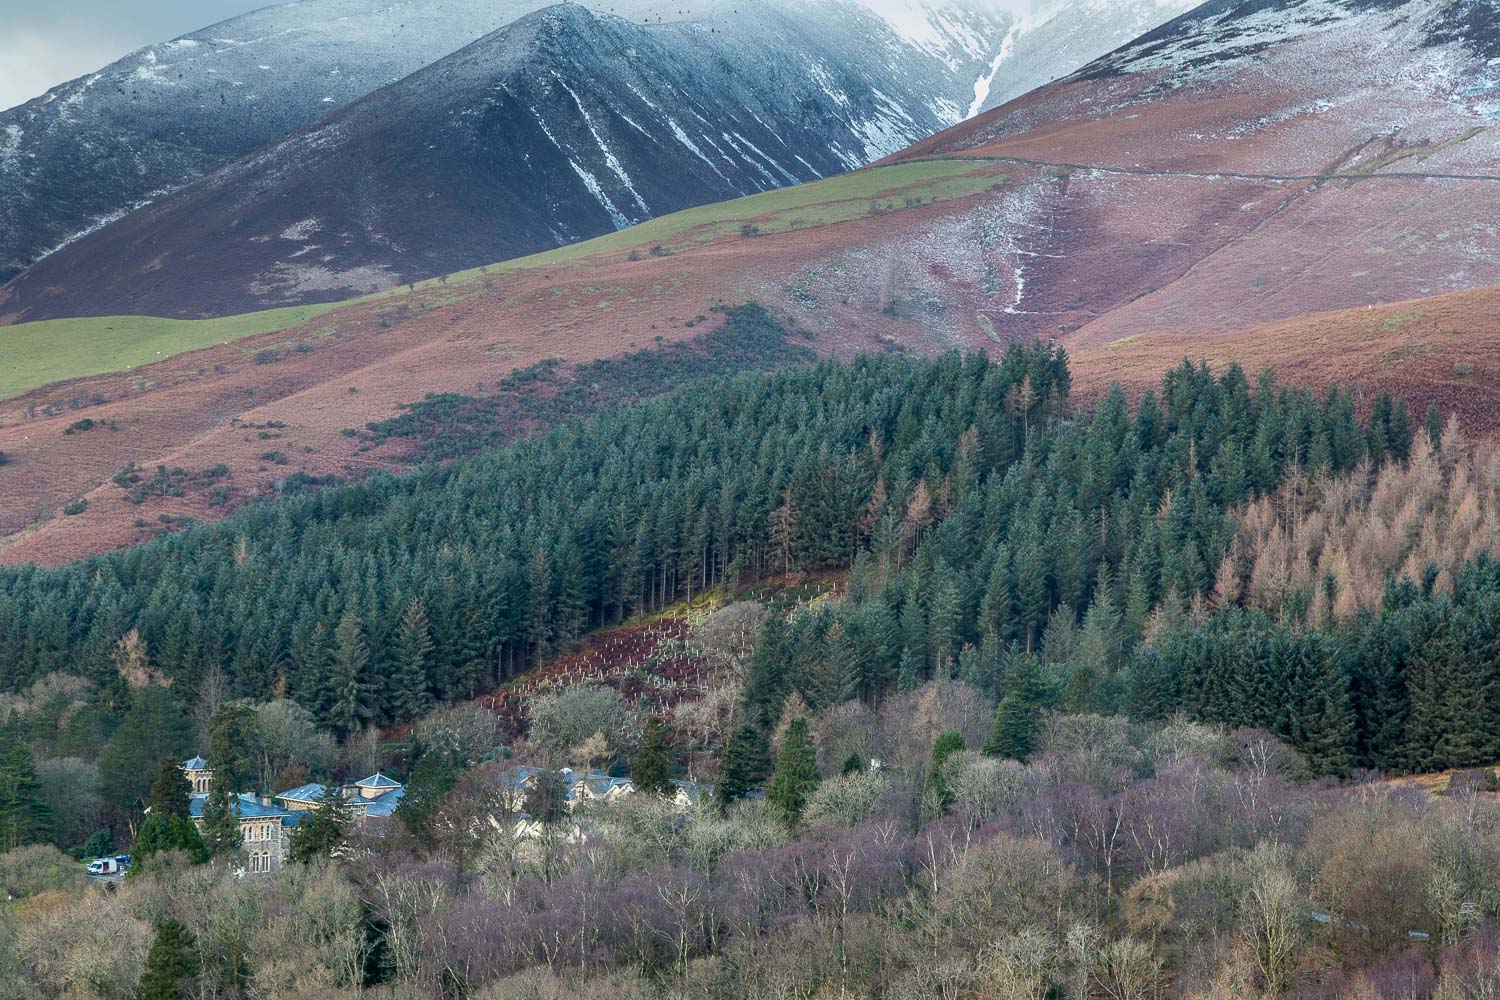 Underscar Manor at the foot of Skiddaw